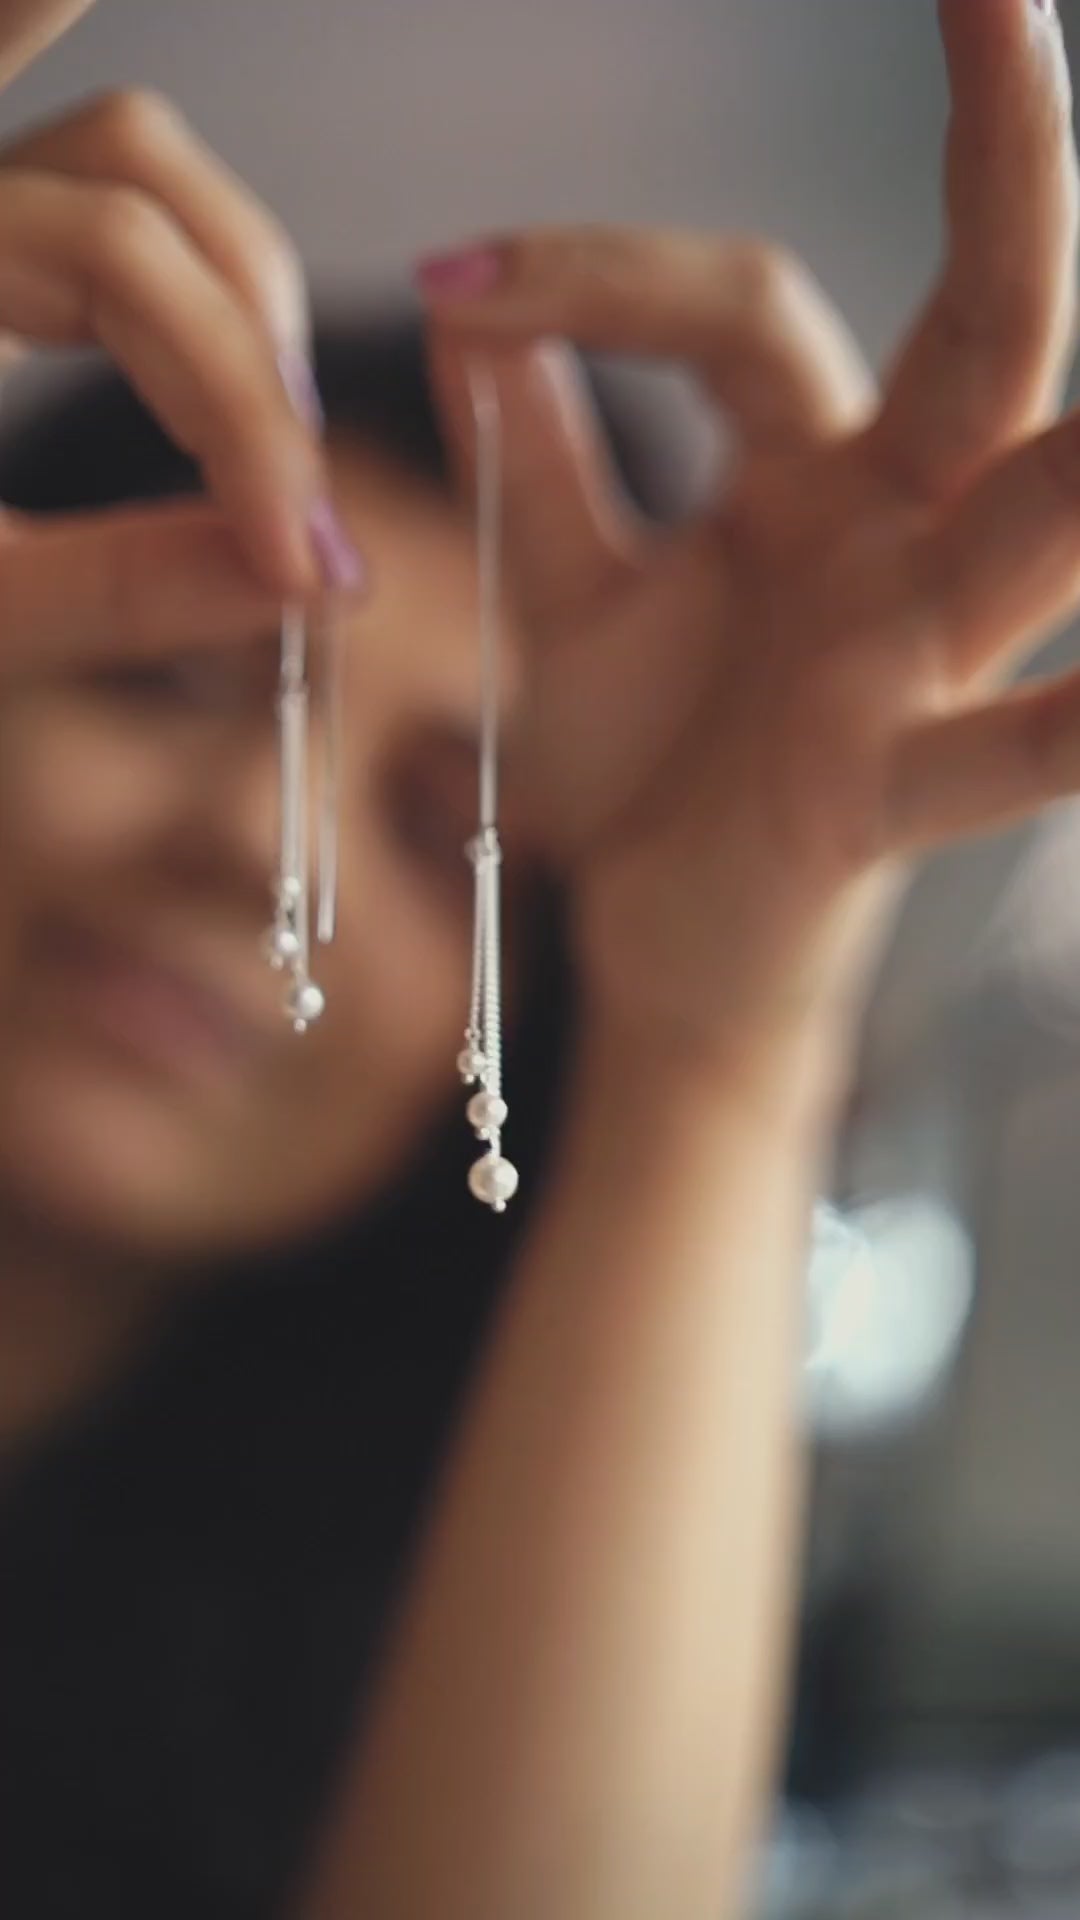 a close up of a person holding a pair of earrings